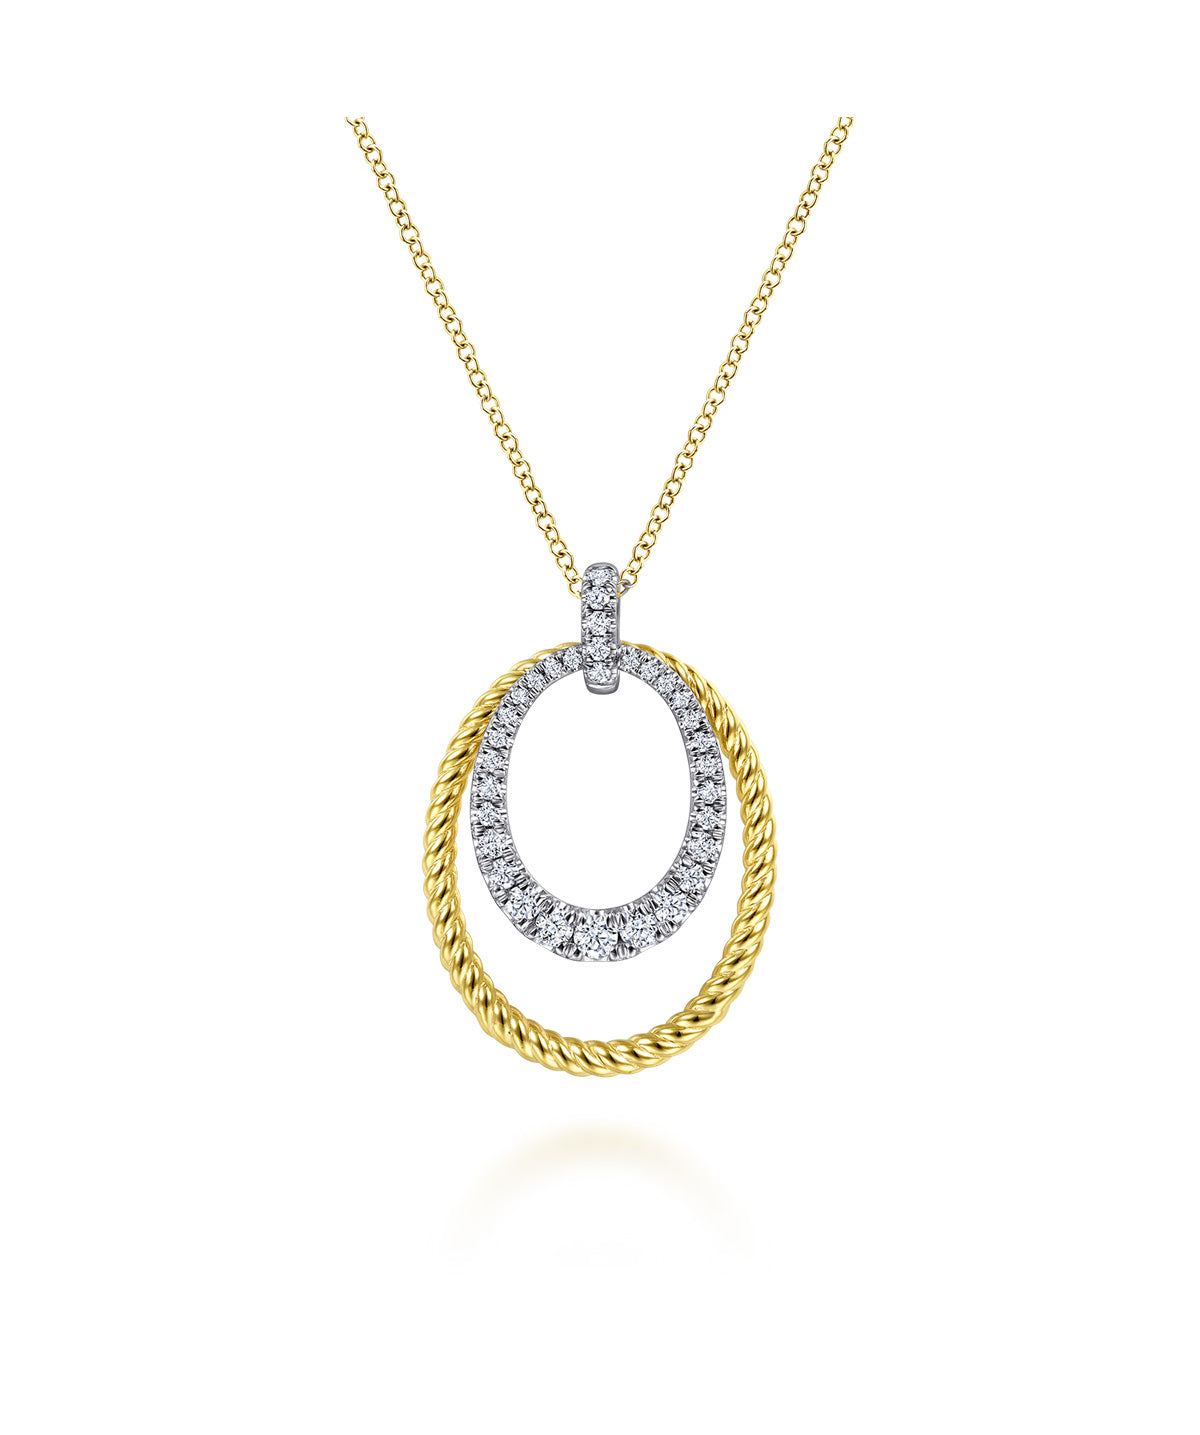 14K White-Yellow Gold Oval Twisted Rope and Pave Diamond Pendant Necklace